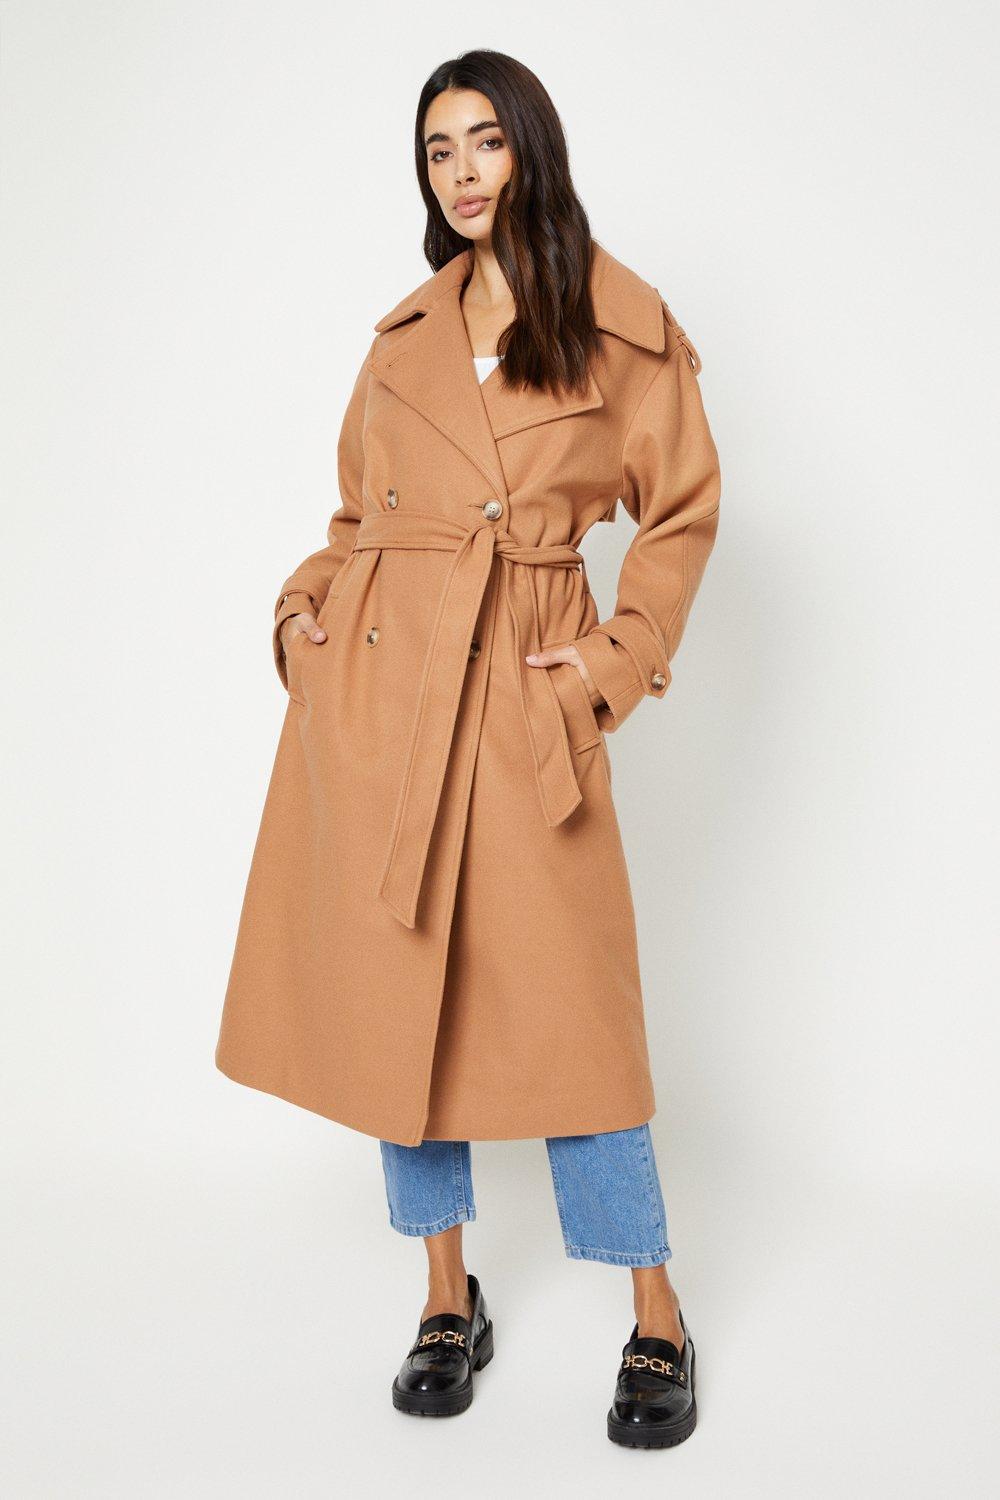 Women’s Belted Wool Look Trench Coat - camel - L